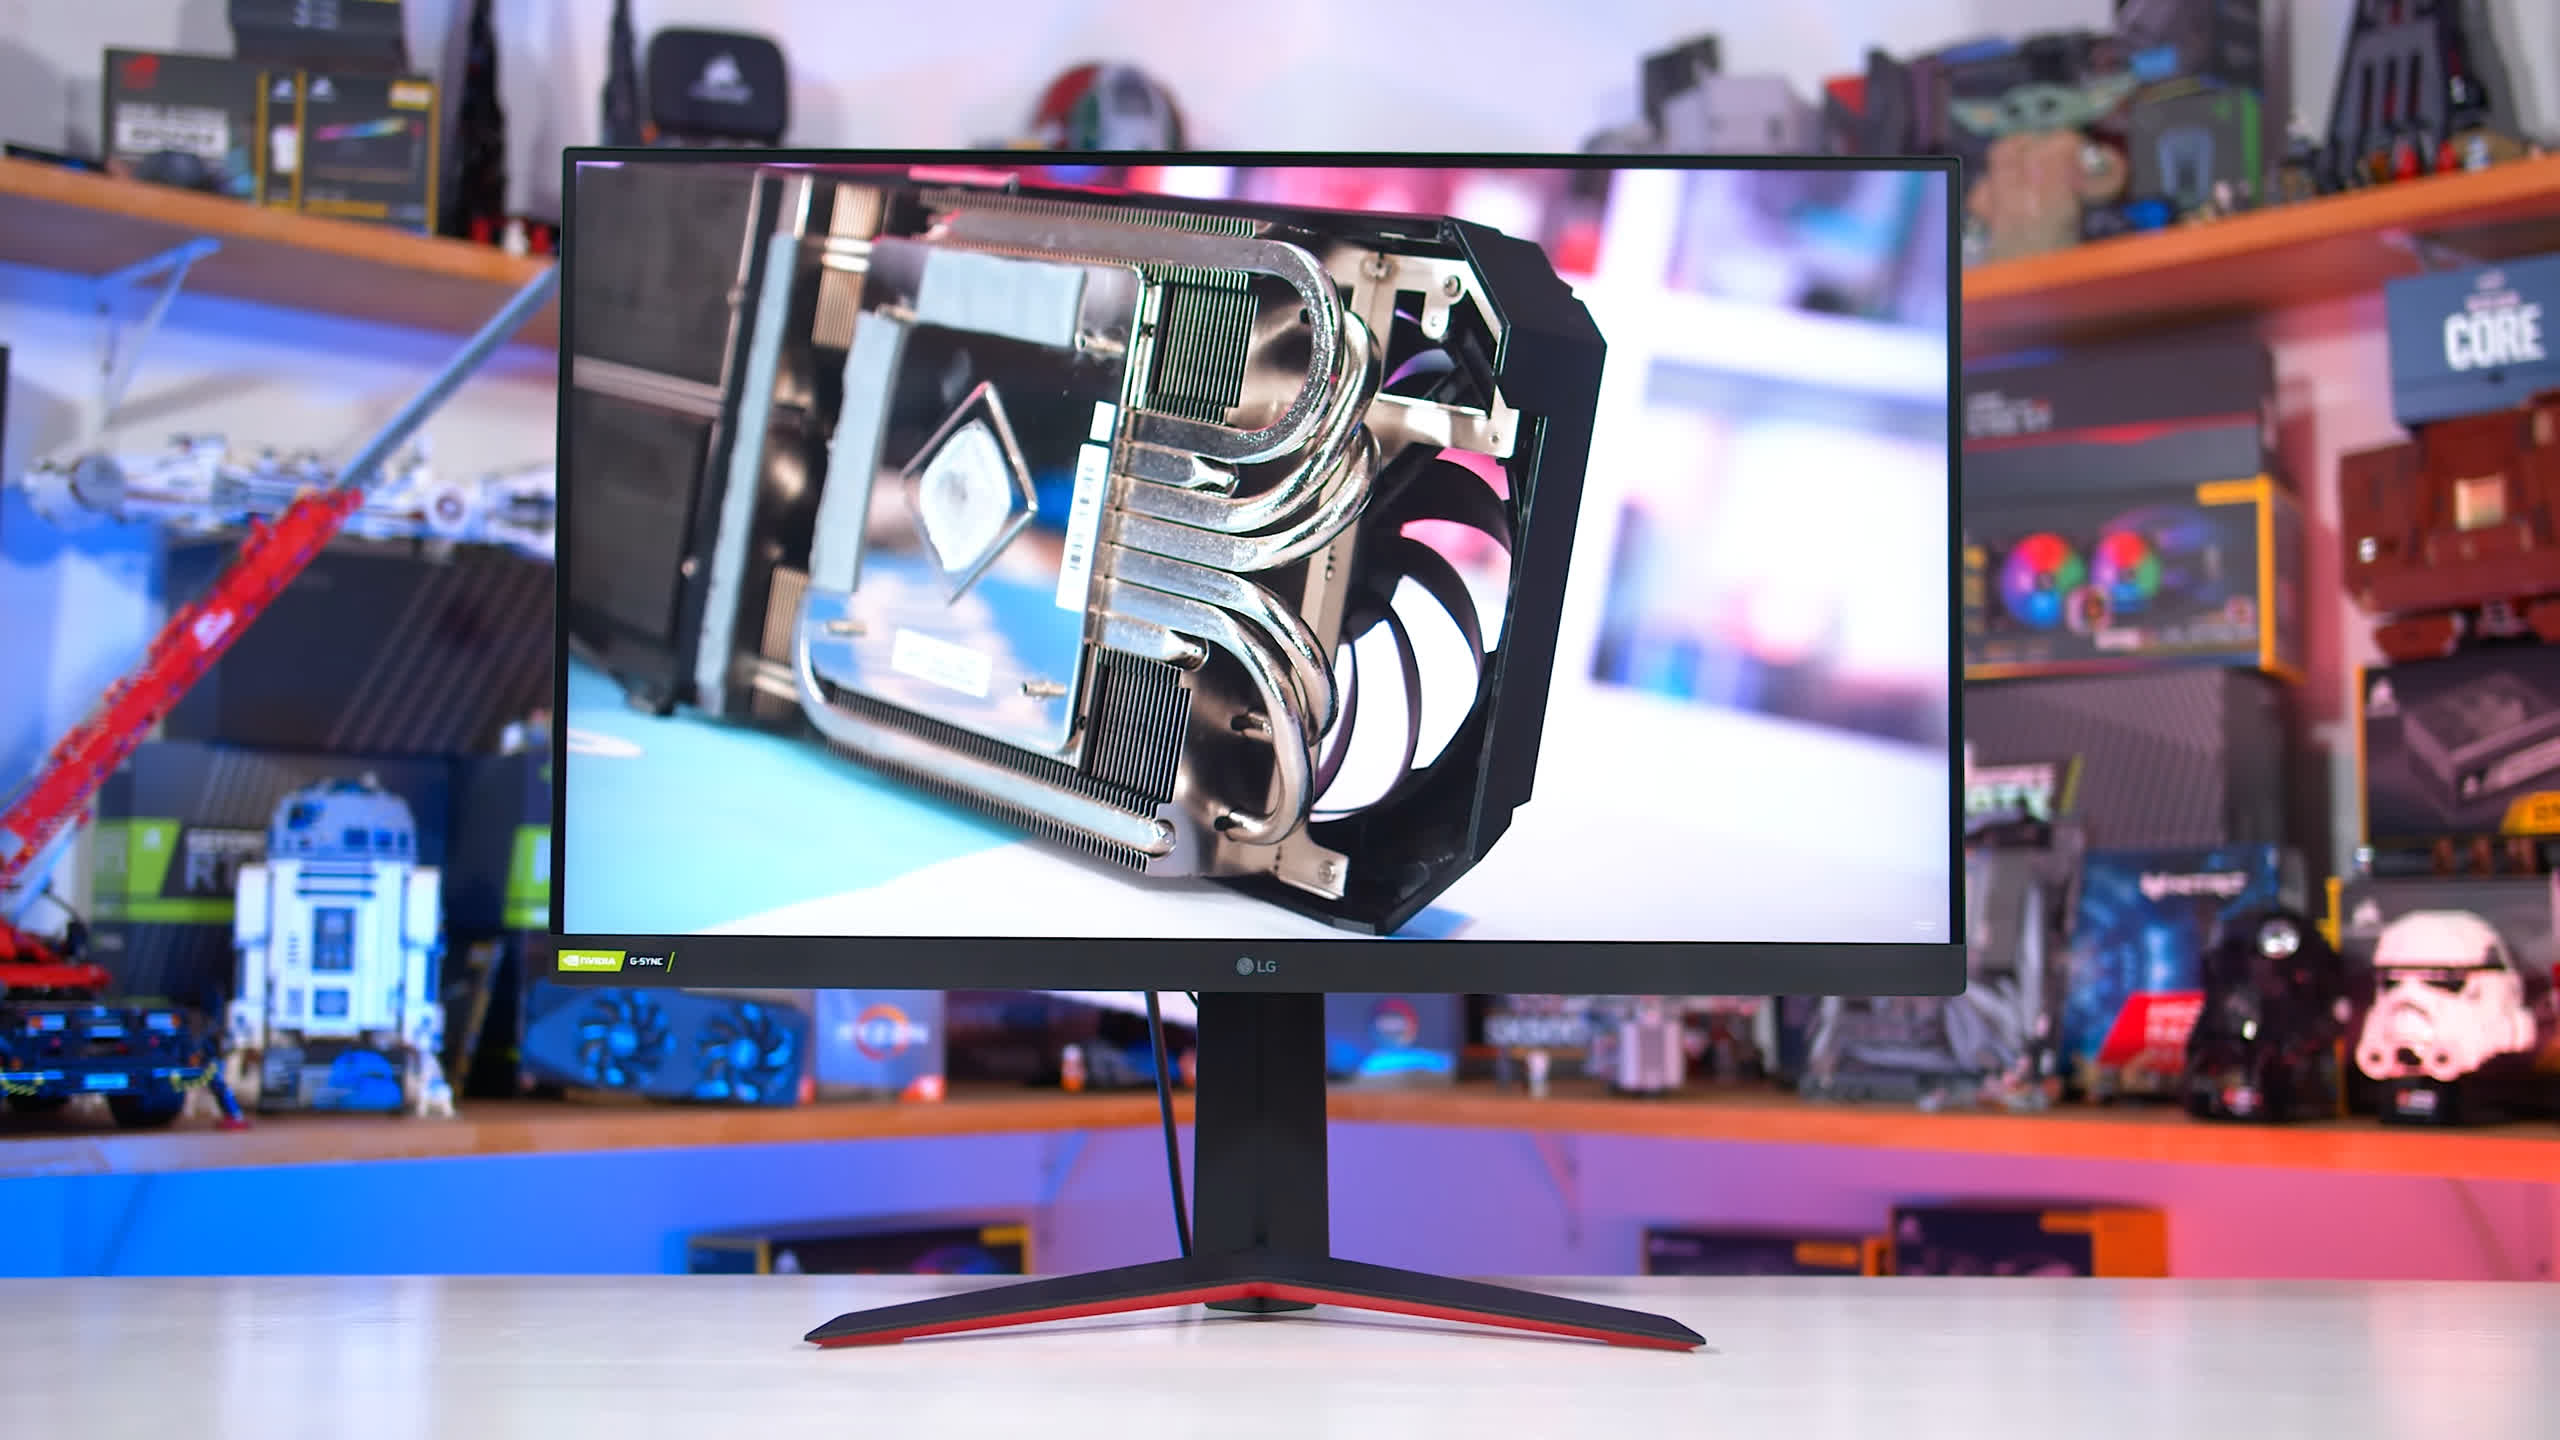 LG 32GP850 Review: The Monitor LG Didn't Want Us to Review | TechSpot